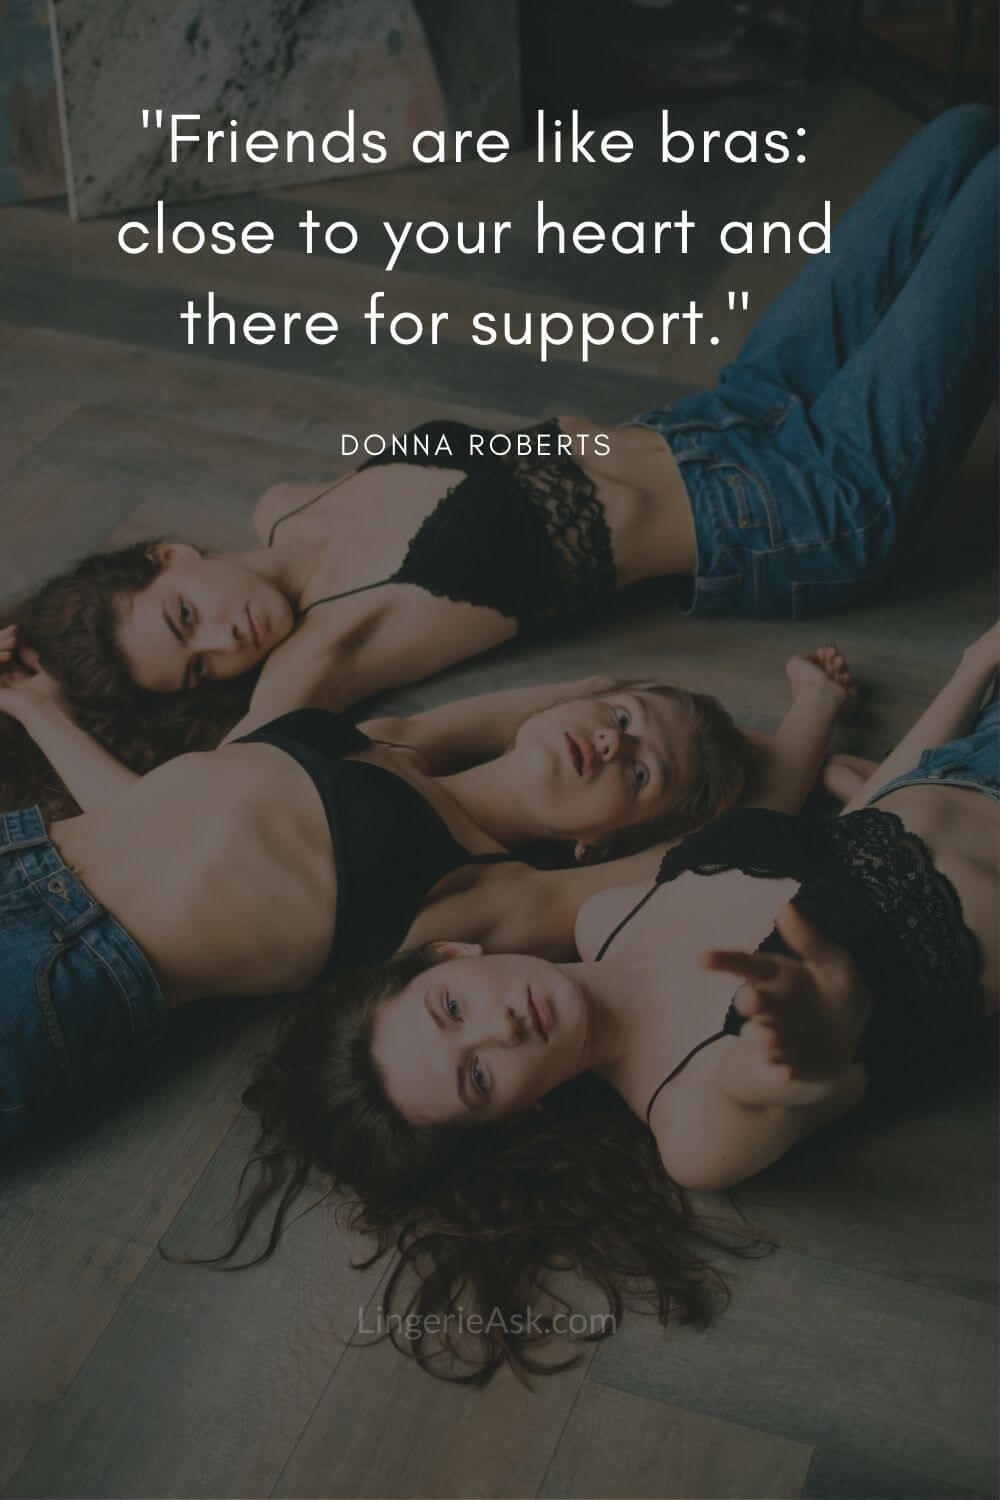 Friends are like bras close to your heart and there for support. Donna Roberts